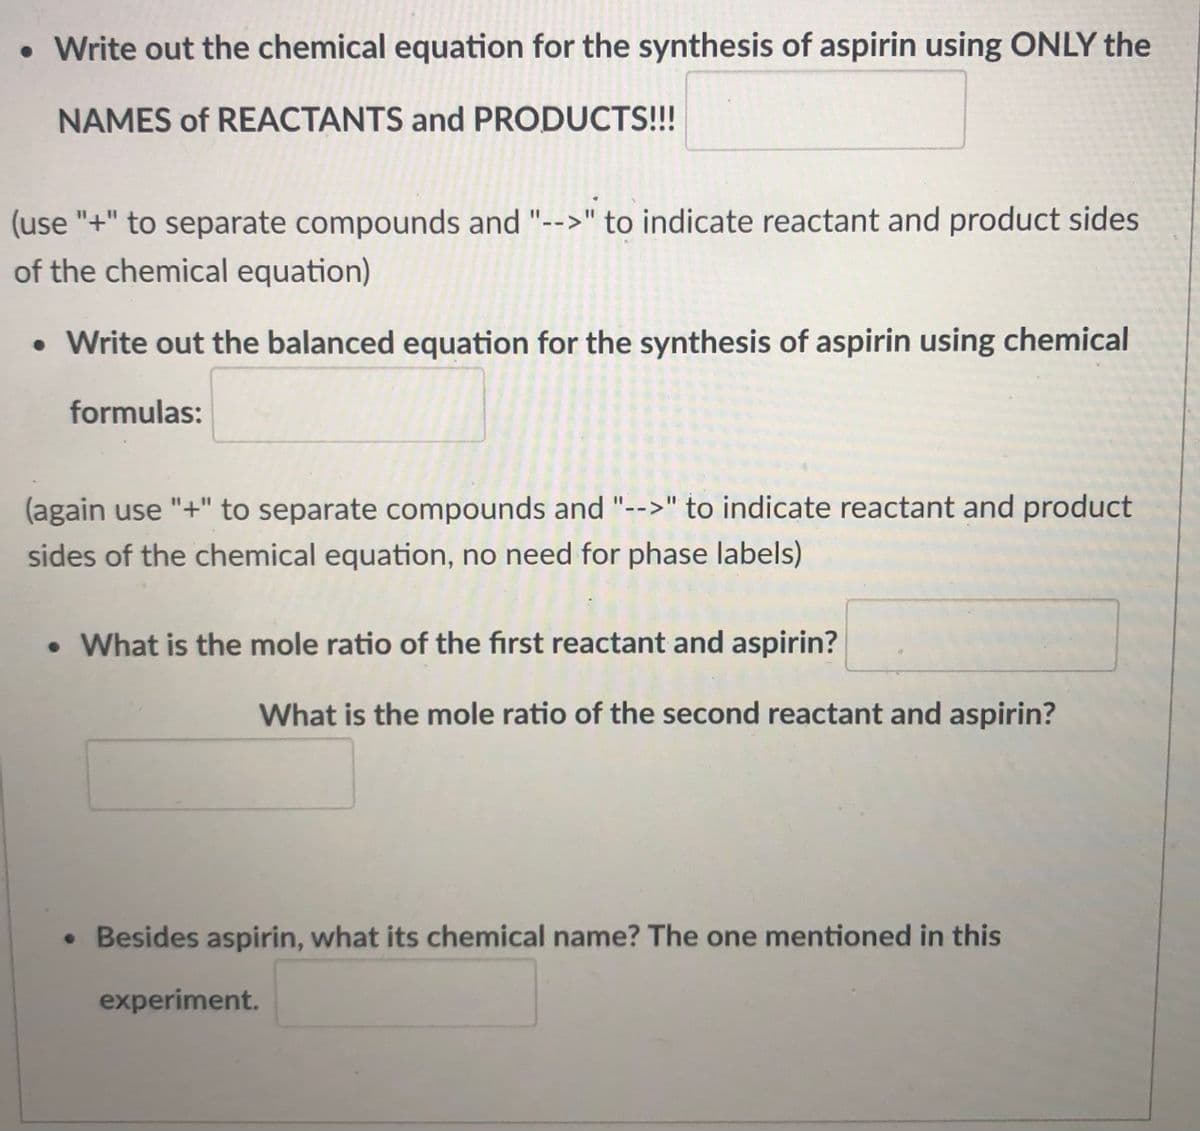 • Write out the chemical equation for the synthesis of aspirin using ONLY the
NAMES of REACTANTS and PRODUCTS!!!
(use "+" to separate compounds and "-->" to indicate reactant and product sides
of the chemical equation)
• Write out the balanced equation for the synthesis of aspirin using chemical
formulas:
(again use "+" to separate compounds and "-->" to indicate reactant and product
sides of the chemical equation, no need for phase labels)
• What is the mole ratio of the first reactant and aspirin?
What is the mole ratio of the second reactant and aspirin?
• Besides aspirin, what its chemical name? The one mentioned in this
experiment.
